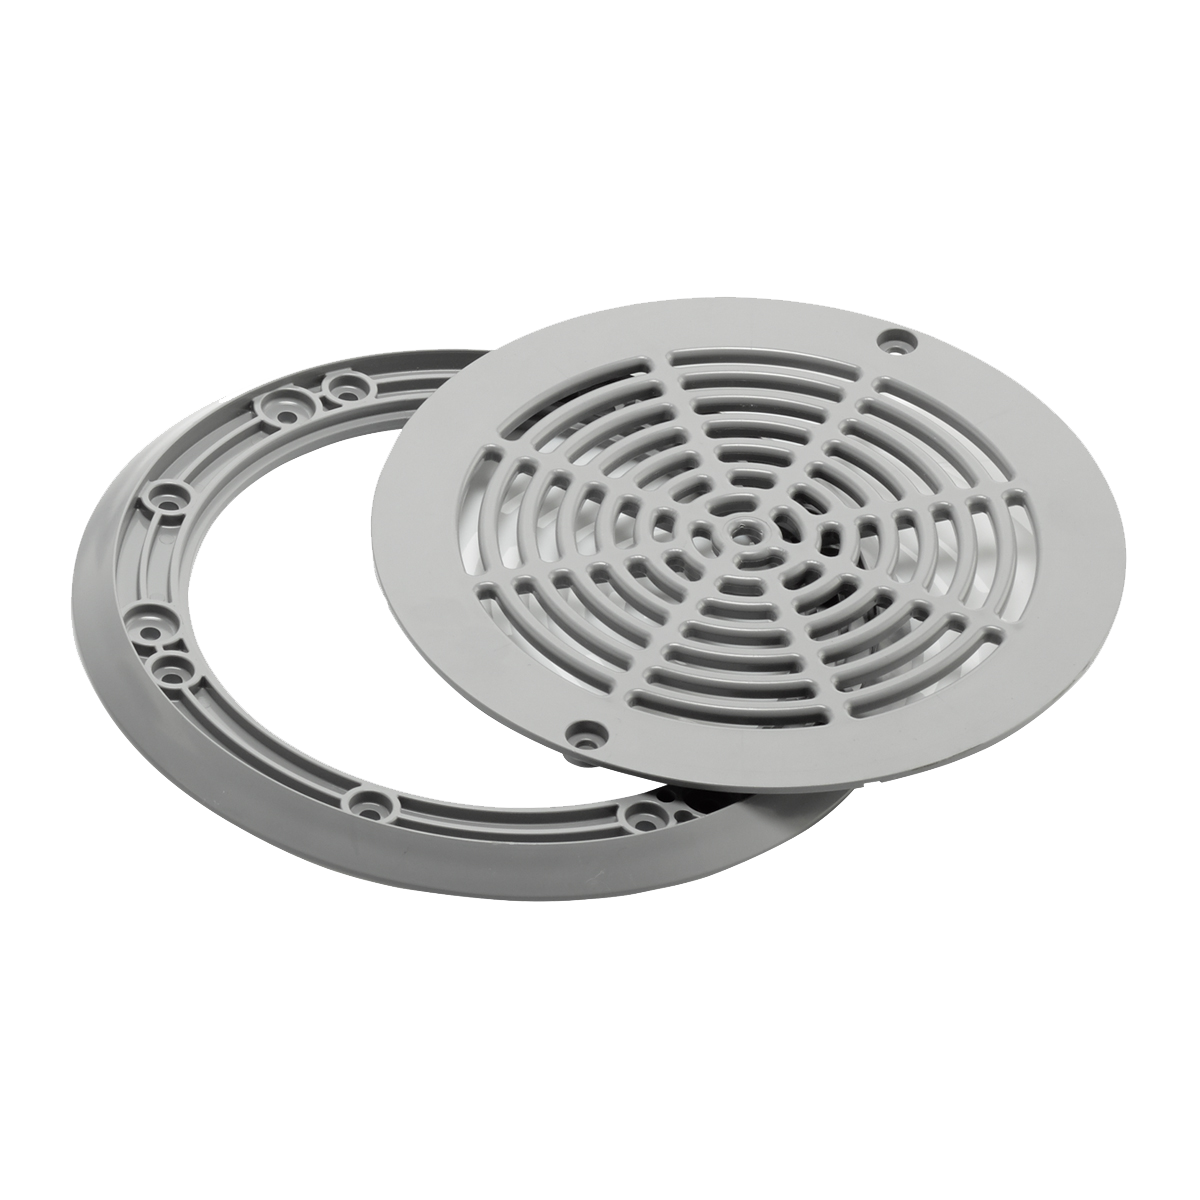 Ocean®  flange for main drain M5 and PT ABS grey Ocean®  flange for main drain M5 and PT ABS grey